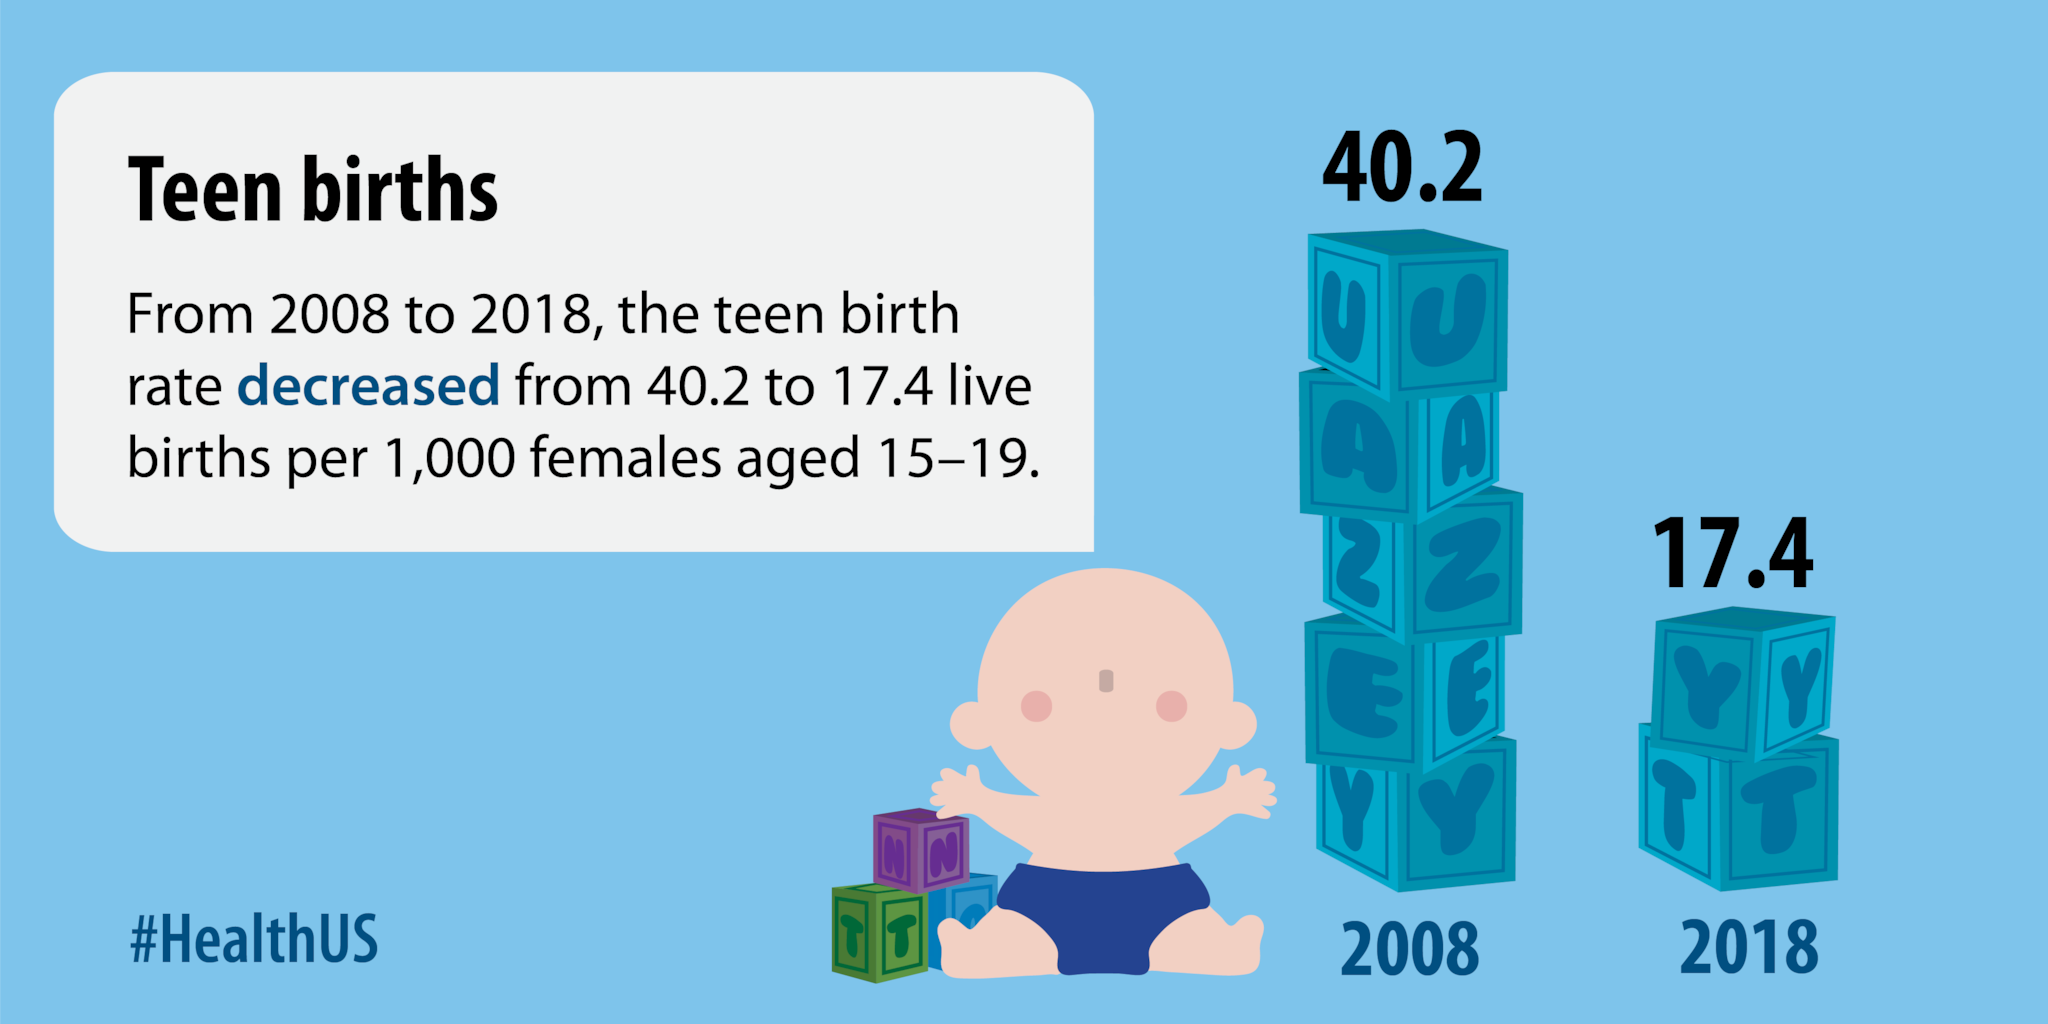 From 2008 to 2018, the teen birth rate decreased from 40.2 to 17.4 live births per 1,000 females aged 15-19.